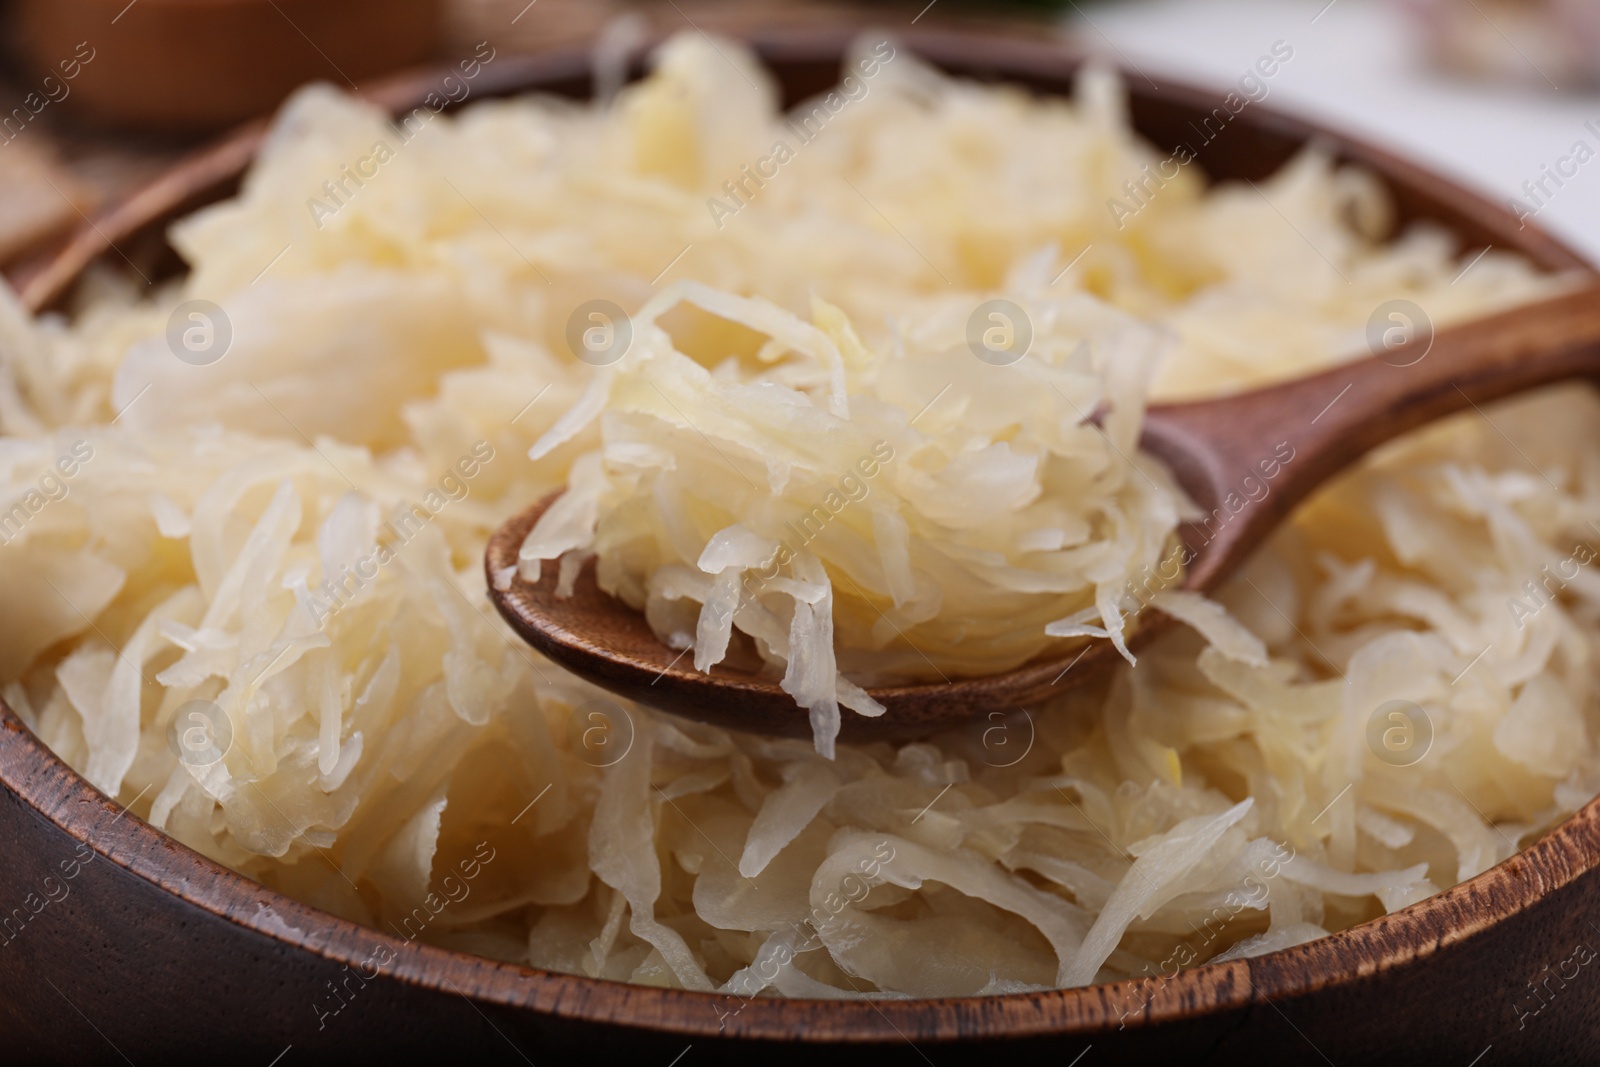 Photo of Spoon and bowl of tasty sauerkraut, closeup view